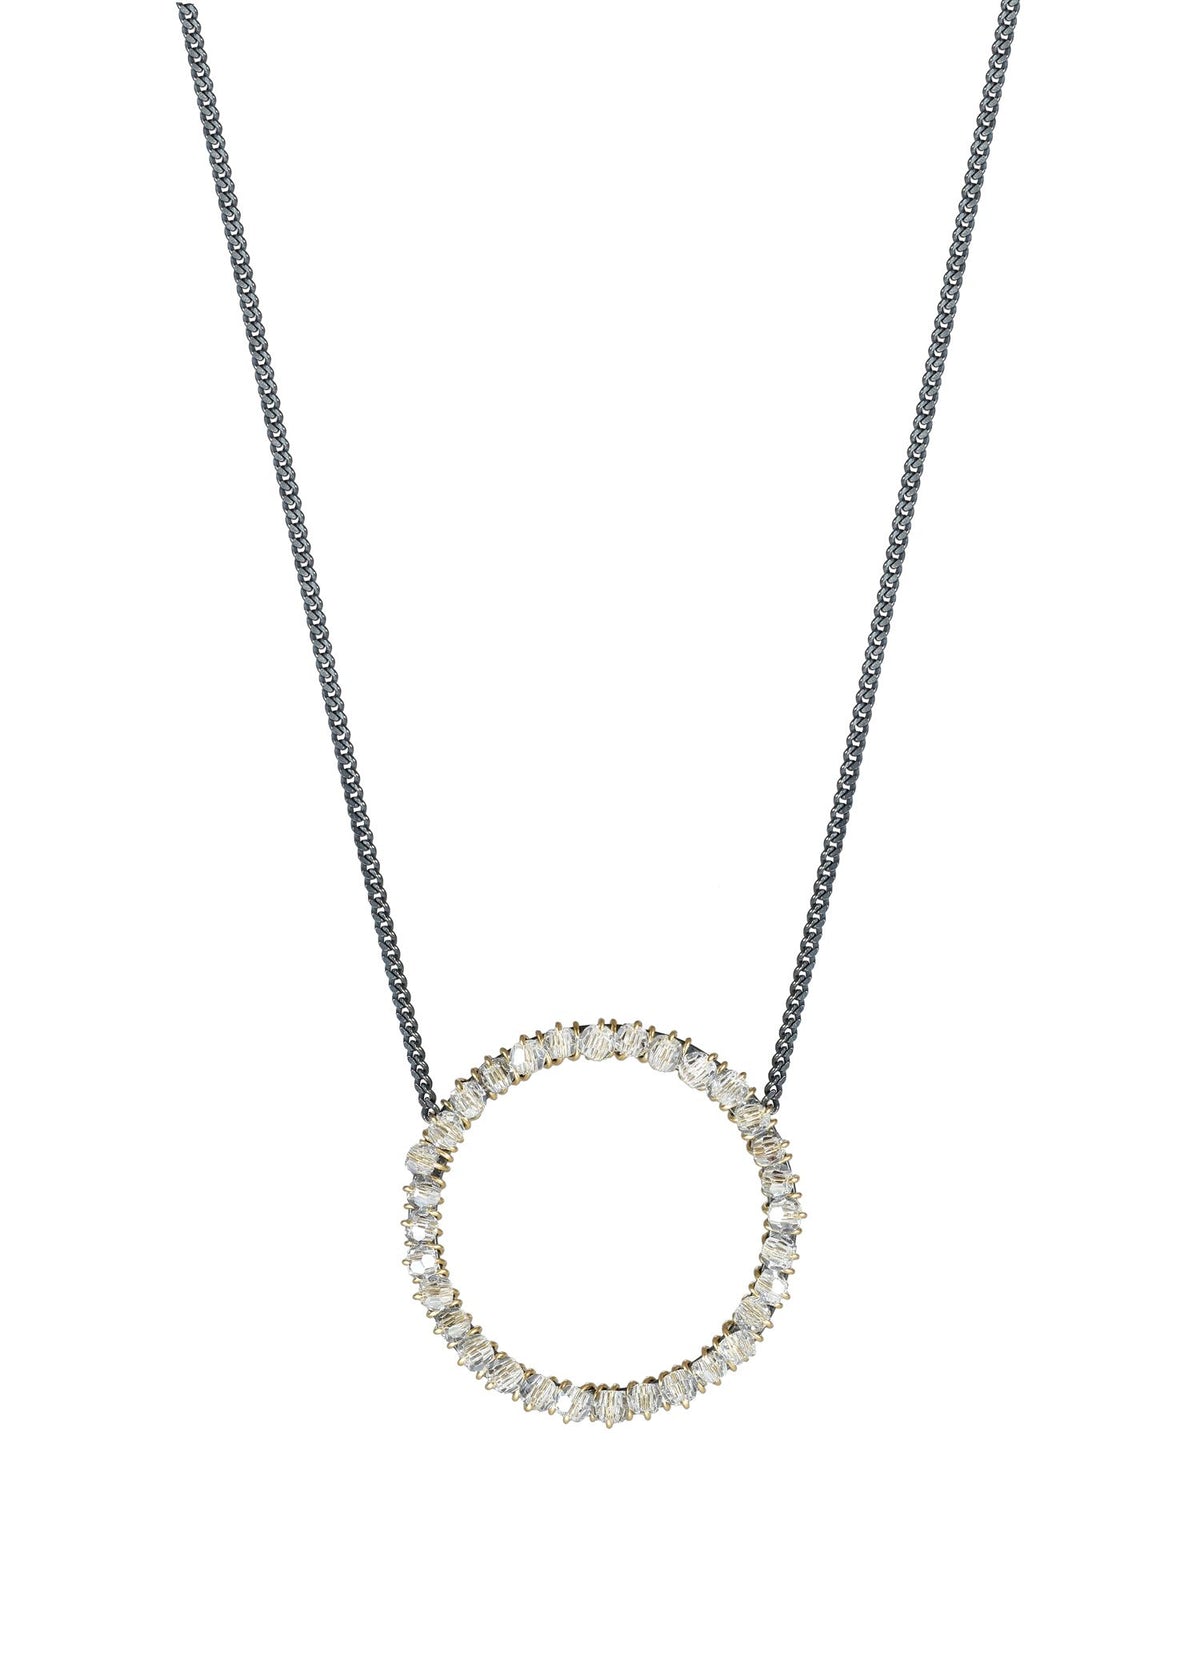 Crystal 14k gold fill Blackened sterling silver Mixed metal Necklace measures 16&quot; in length Pendant measures 13/16&quot; in diameter Handmade in our Los Angeles studio